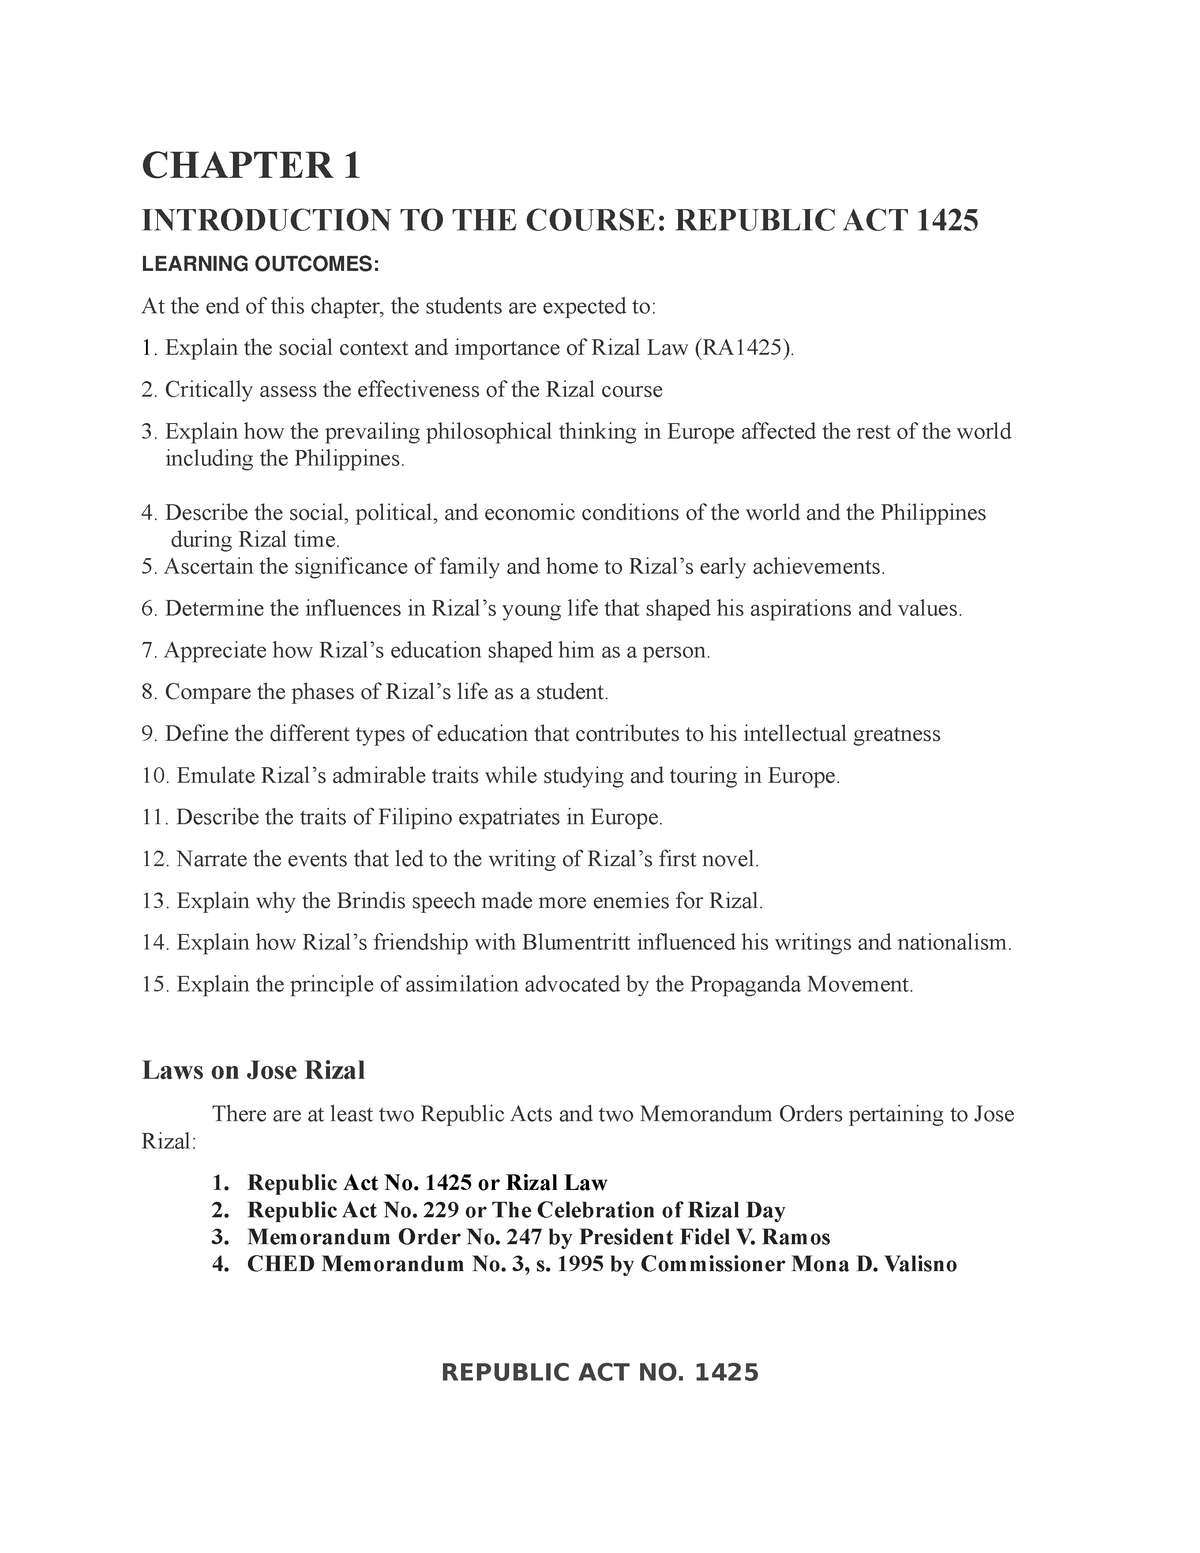 Chapter 1 laws of Jose Rizal - CHAPTER 1 INTRODUCTION TO THE COURSE